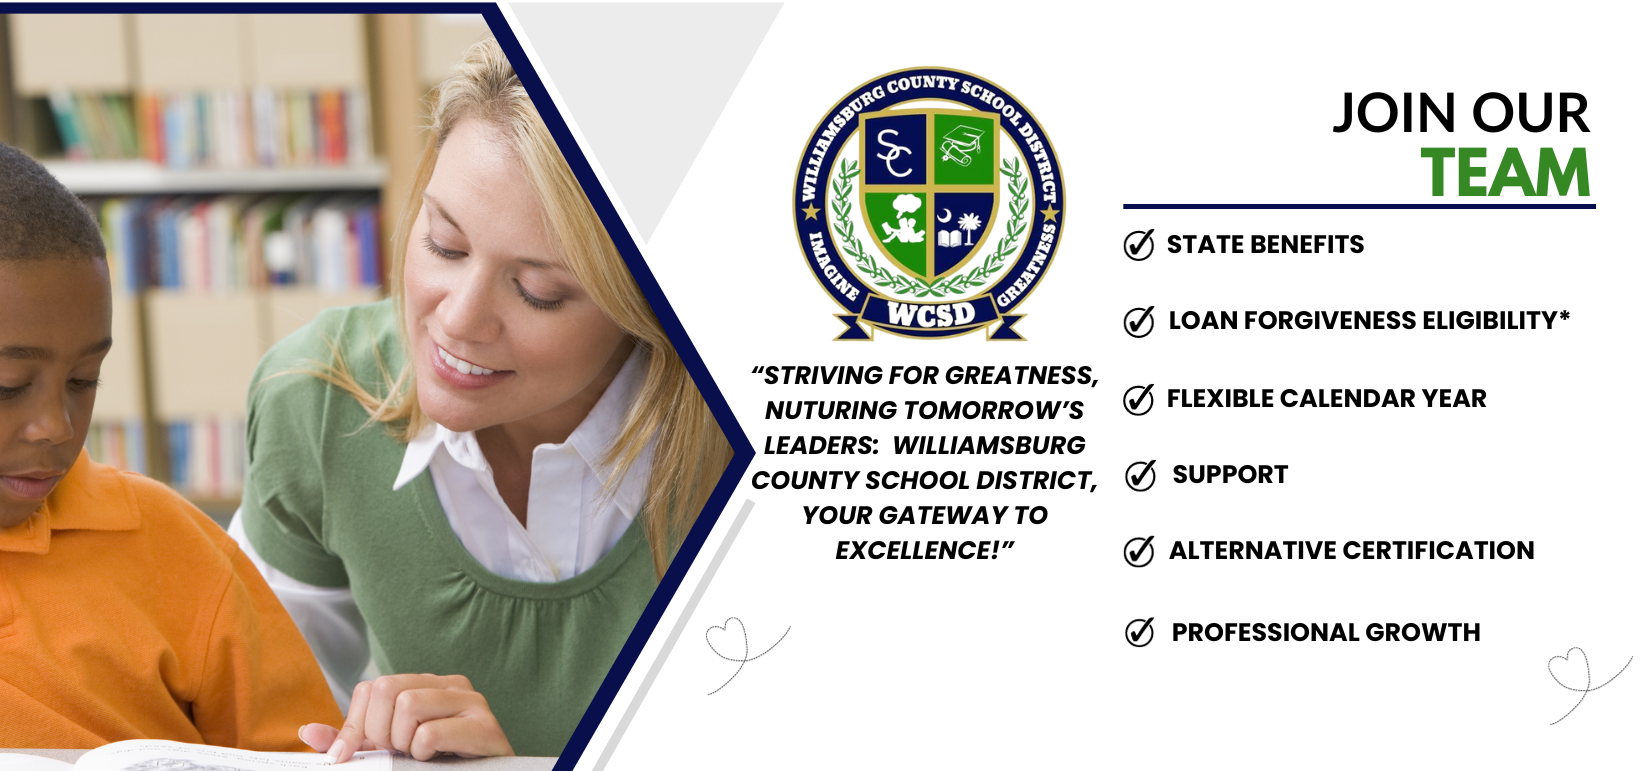  Williamsburg County School District. Imagine Greatness. WCSD Logo. Join Our Team. Checklist: state benefits, loan forgiveness eligibility, flexible calendar year, support, alternative certification, professional growth. "Striving for greatness, nurturing tomorrow's leaders: Williamsburg County School District, your Gateway to Excellence? Apply Now. www.wcsd.k12.sc.us. 843-355-5571